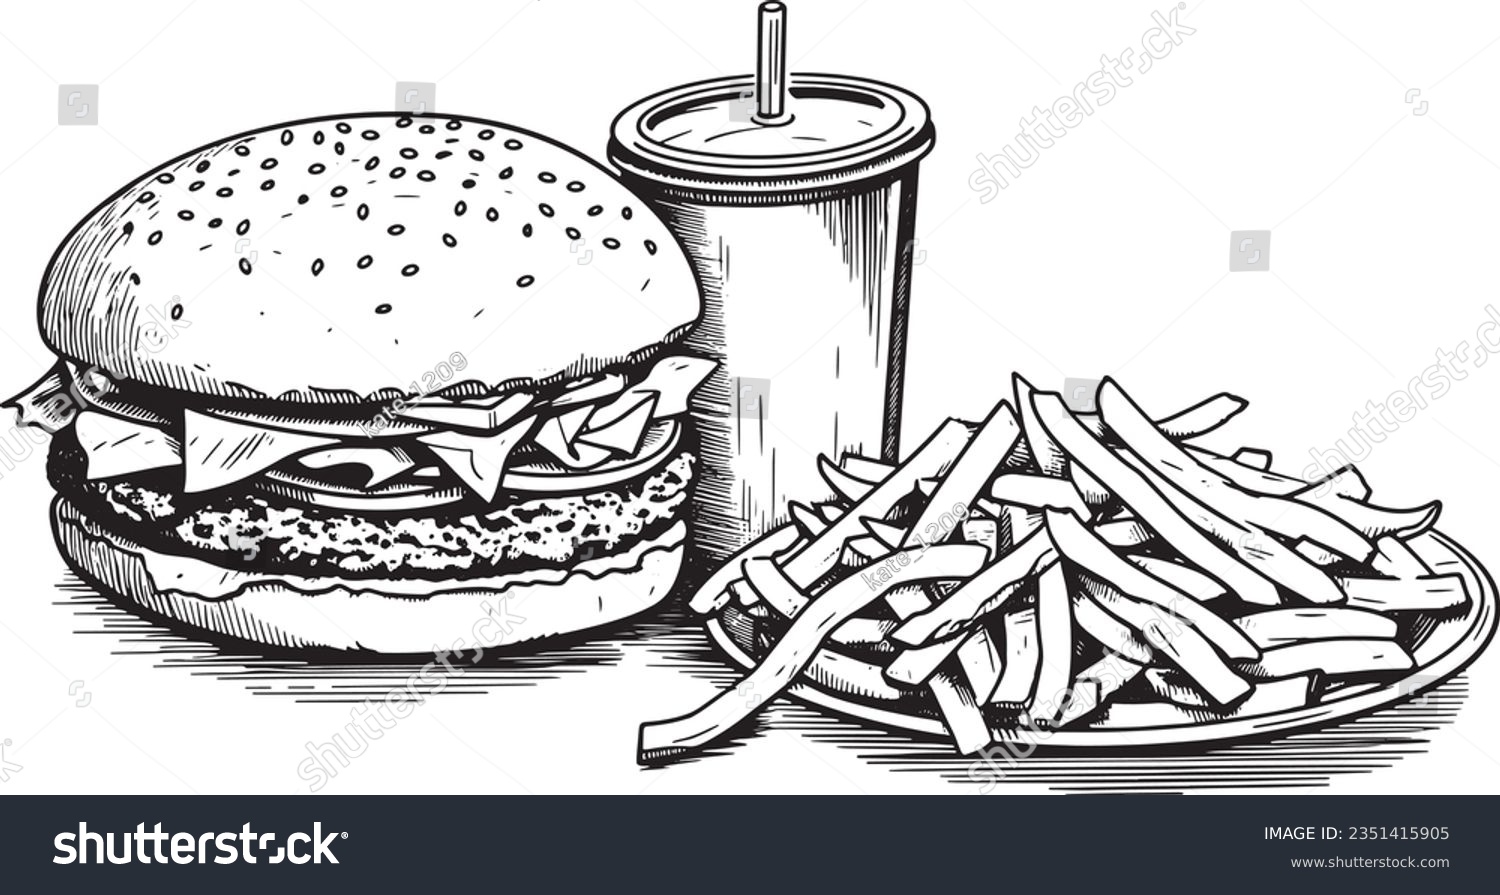 SVG of Burger and fries engraving style, Basic simple Minimalist vector SVG logo graphic, isolated on white background, children's coloring page, outline art, thick crisp lines, black and svg